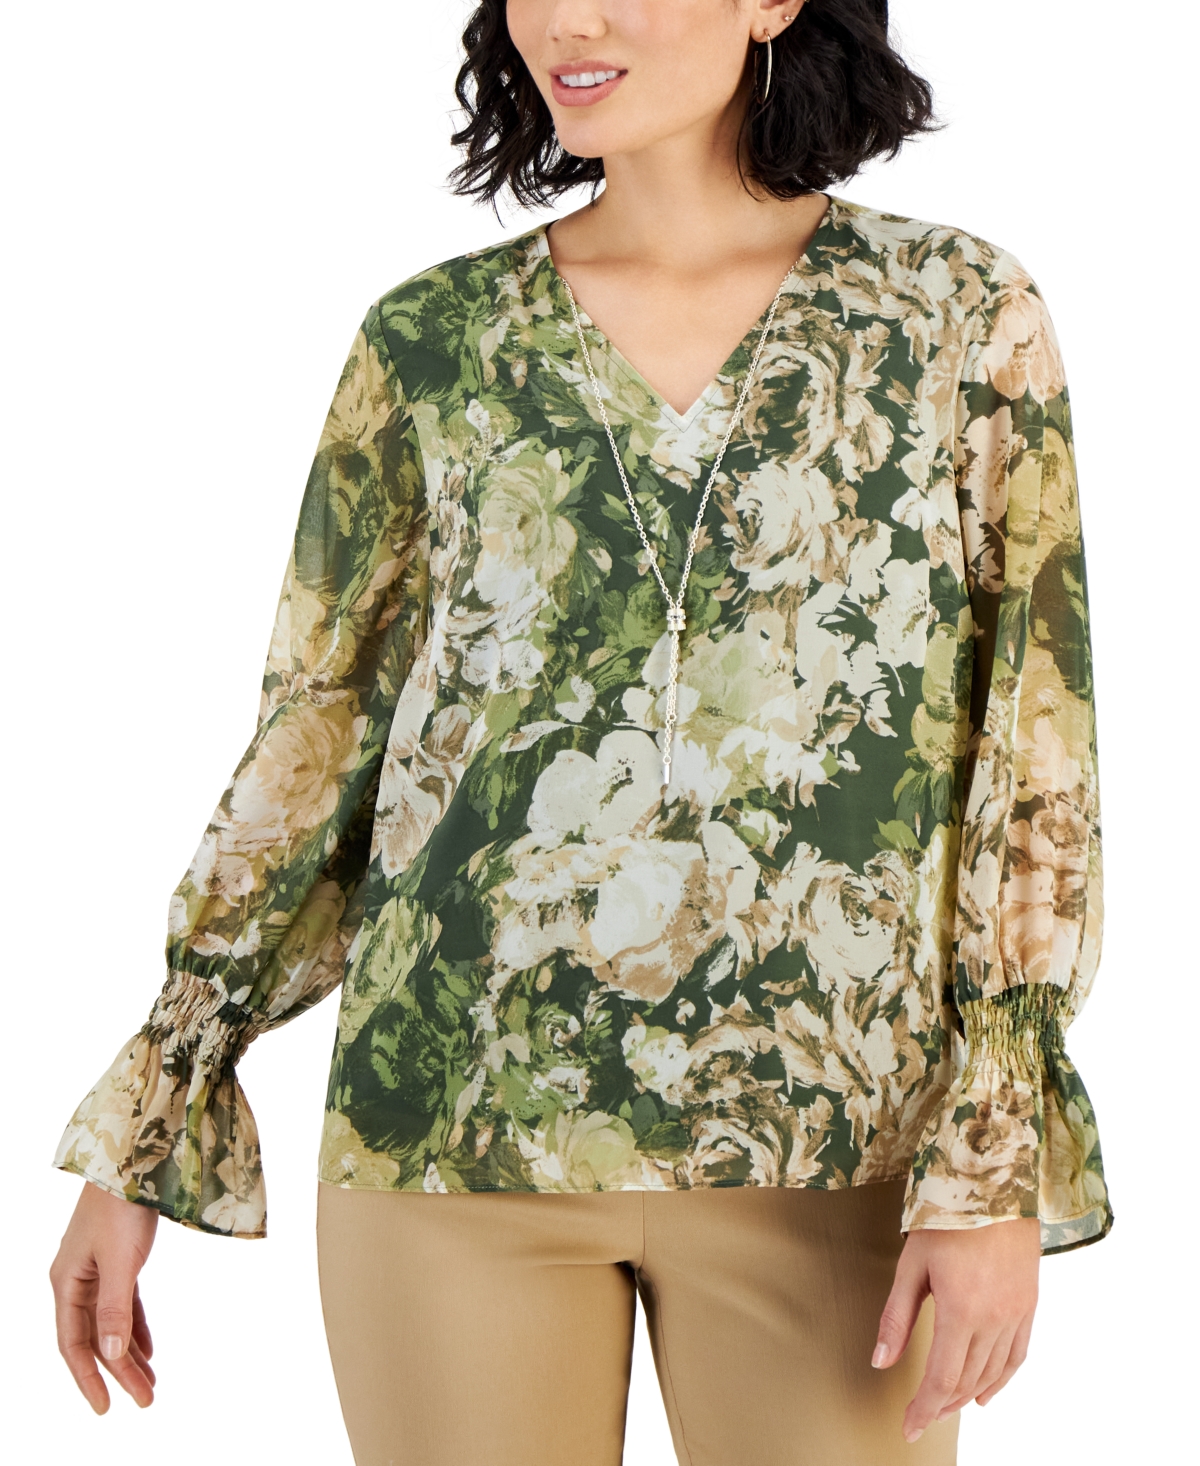 Jm Collection Women's Floral-Print Pleated-Shoulder Top, Created